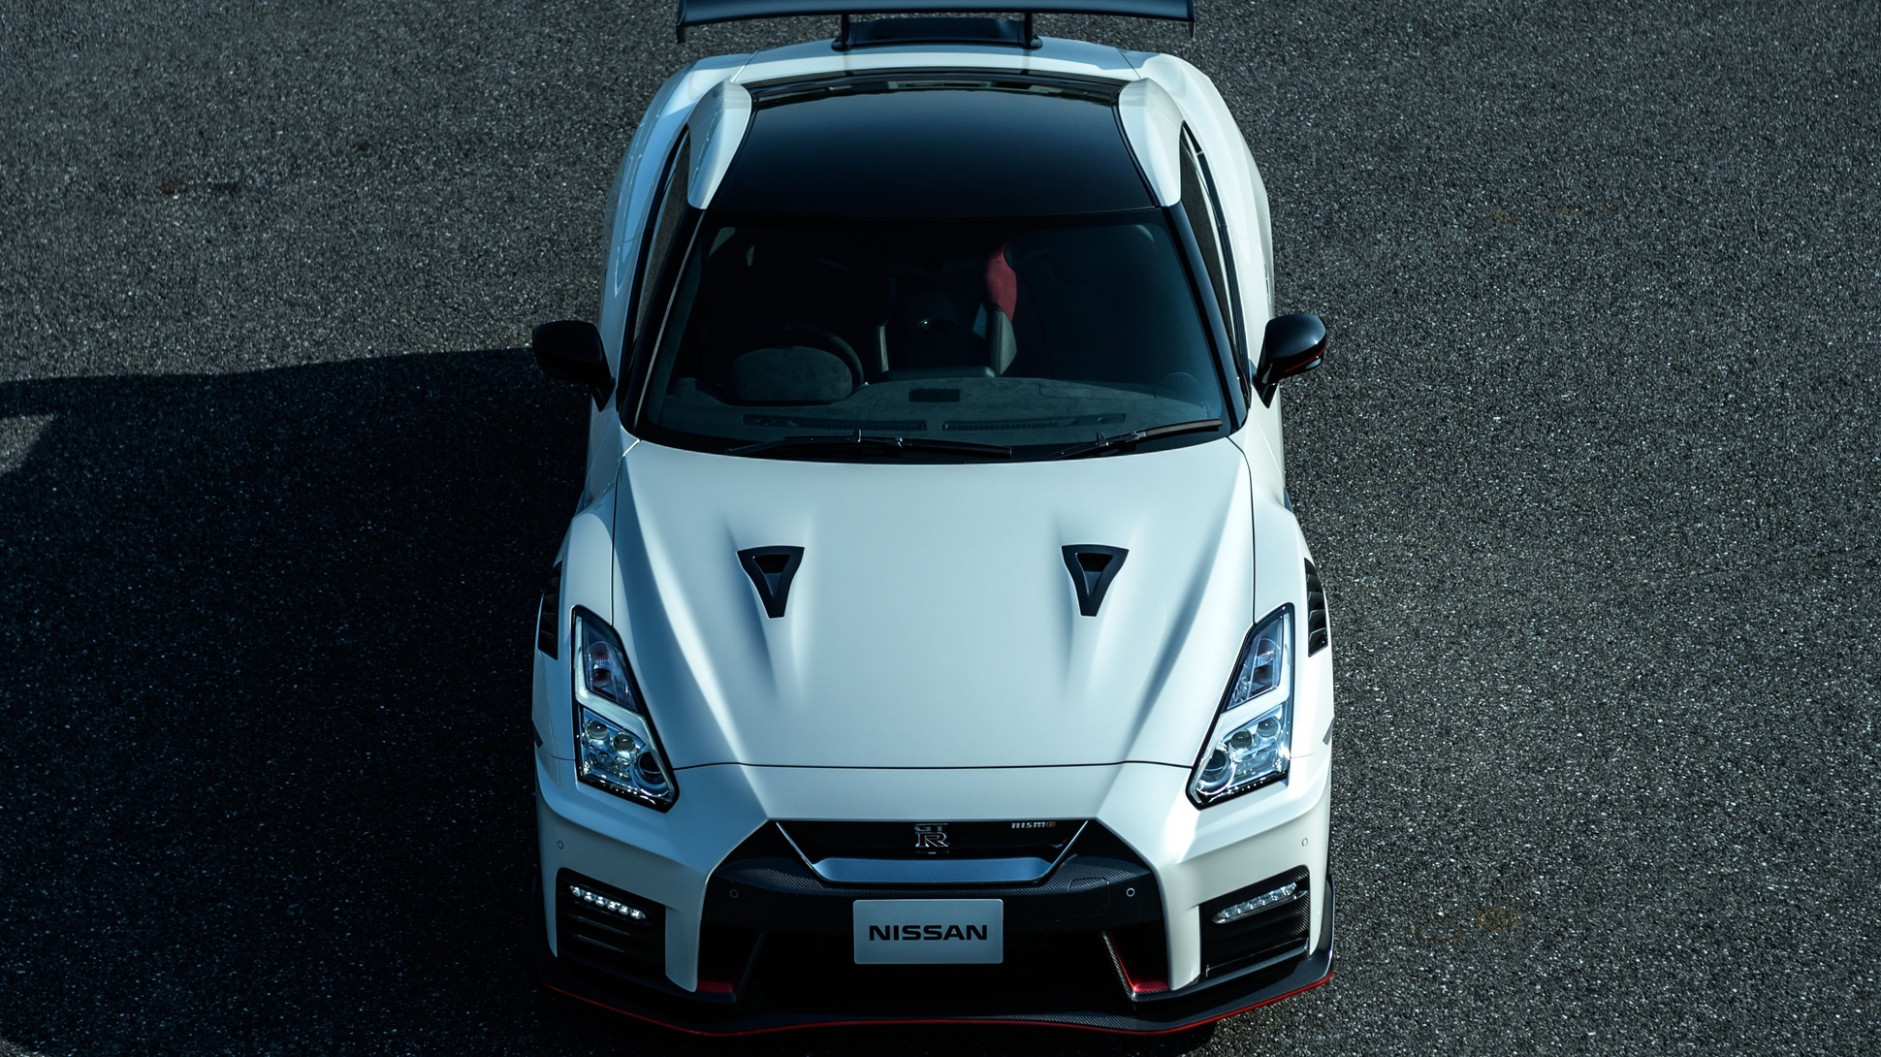 New Review 2022 Nissan GT-R